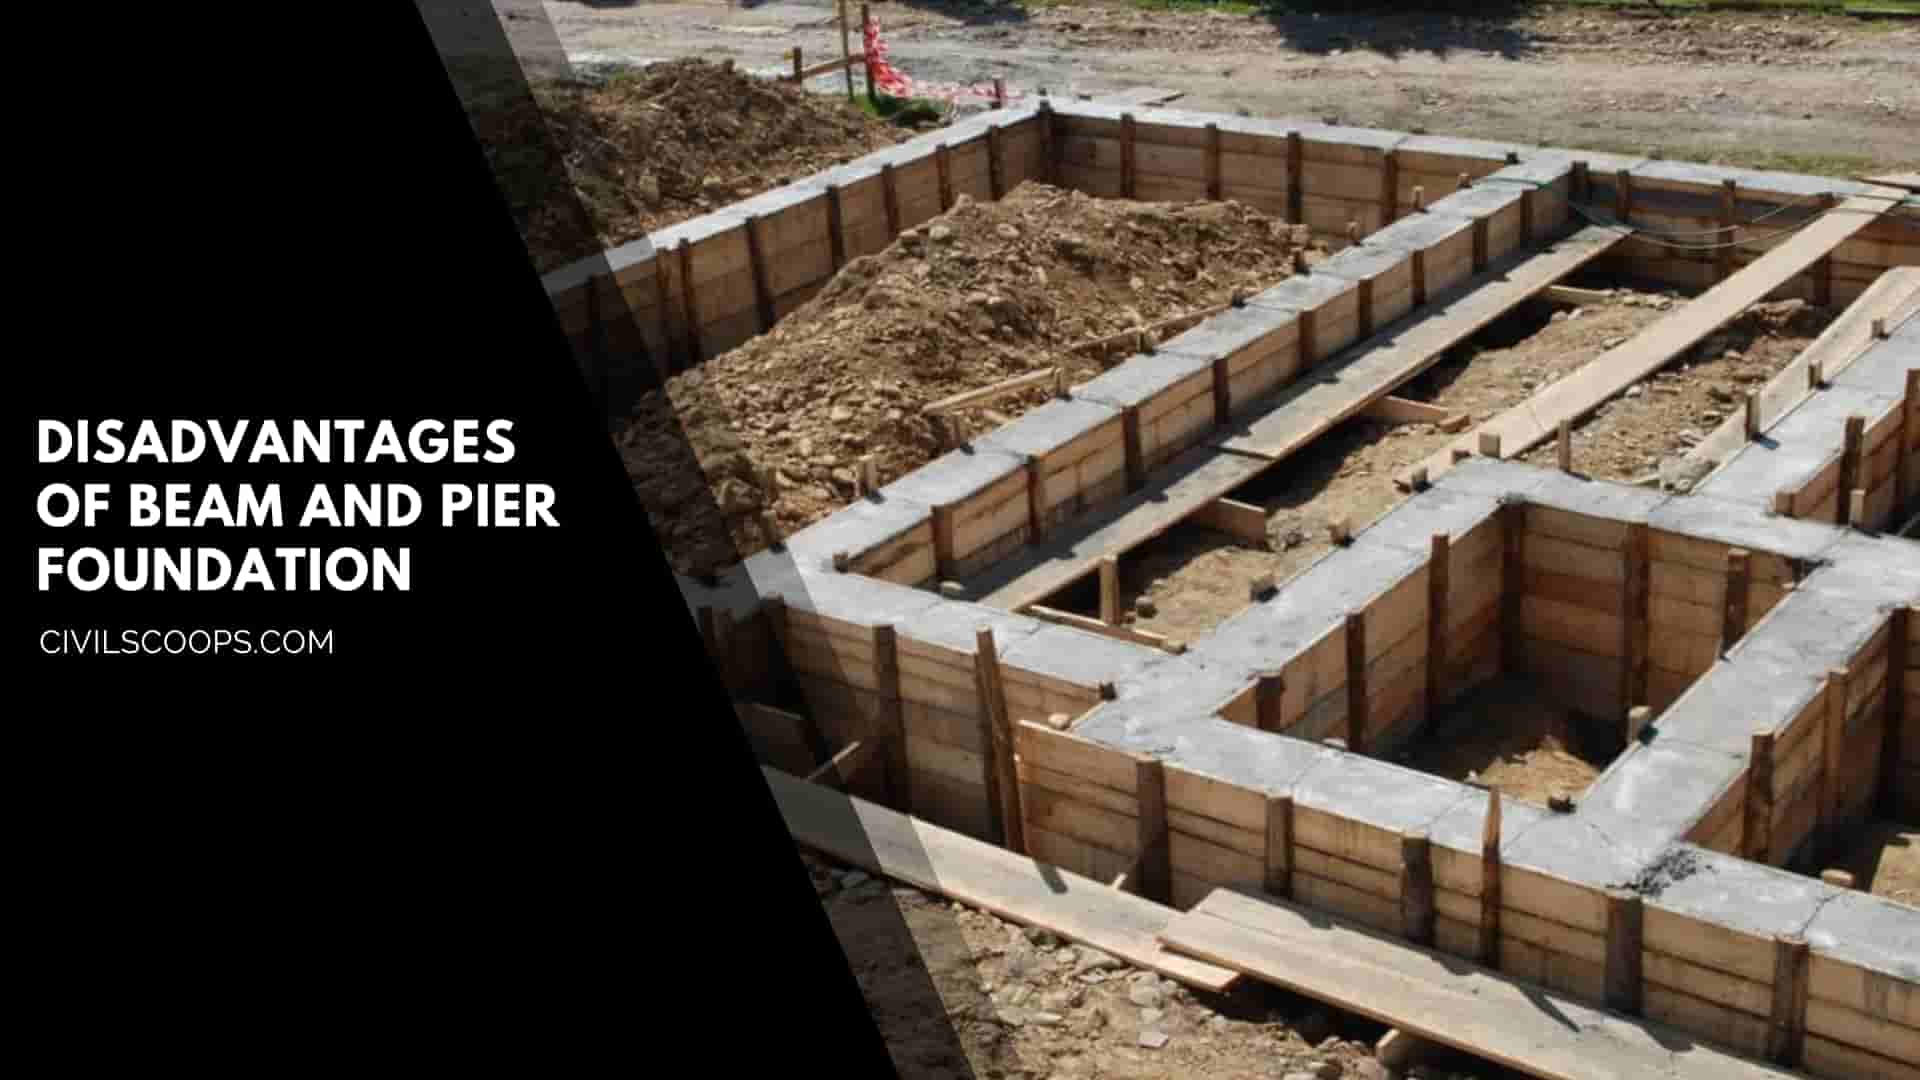 Disadvantages of Beam and Pier Foundation